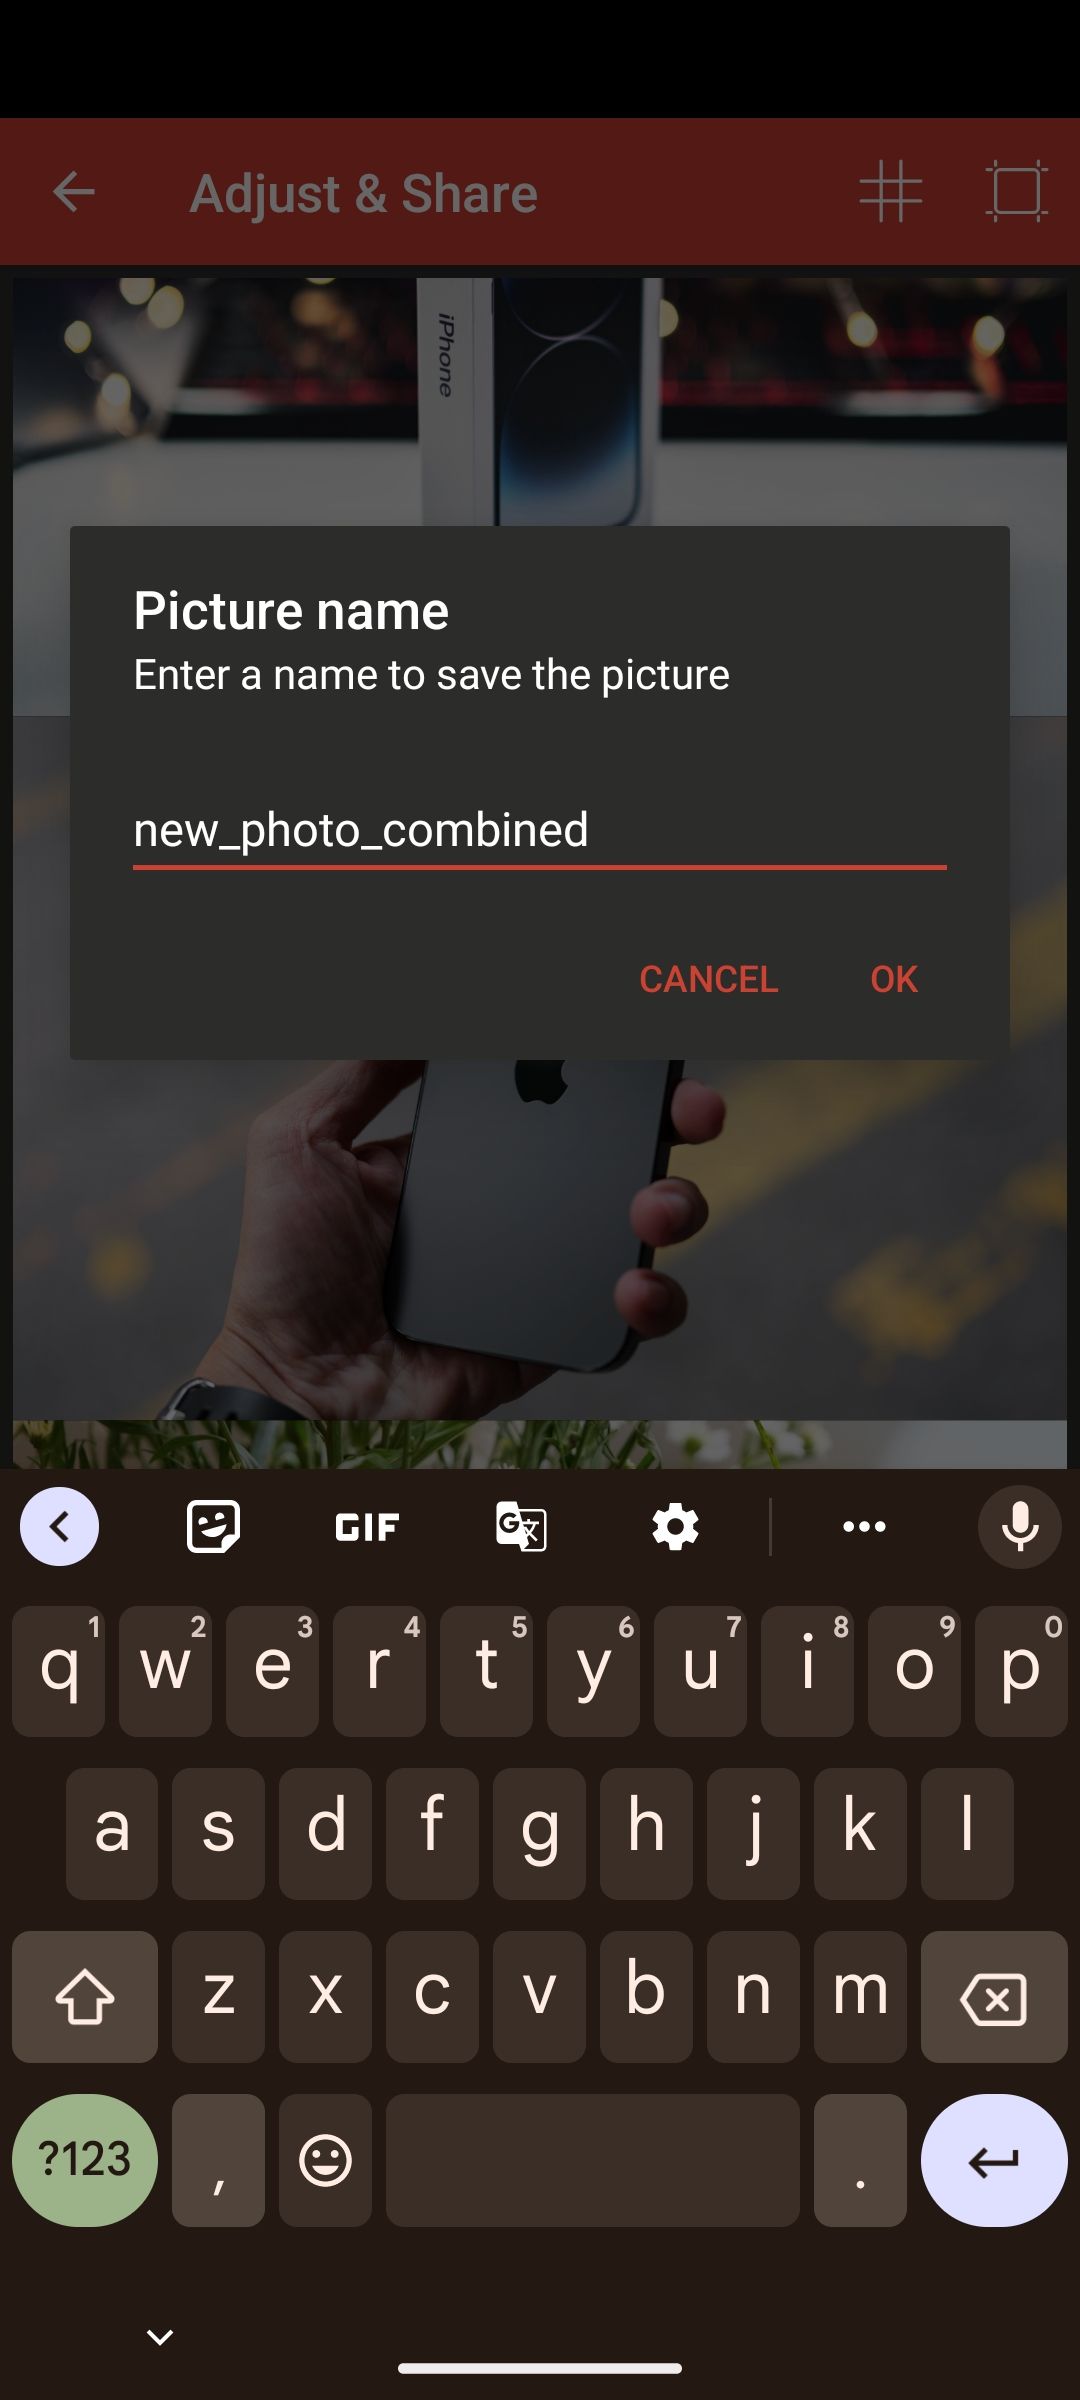 Editing image file name to save after combining images in Image Combiner app